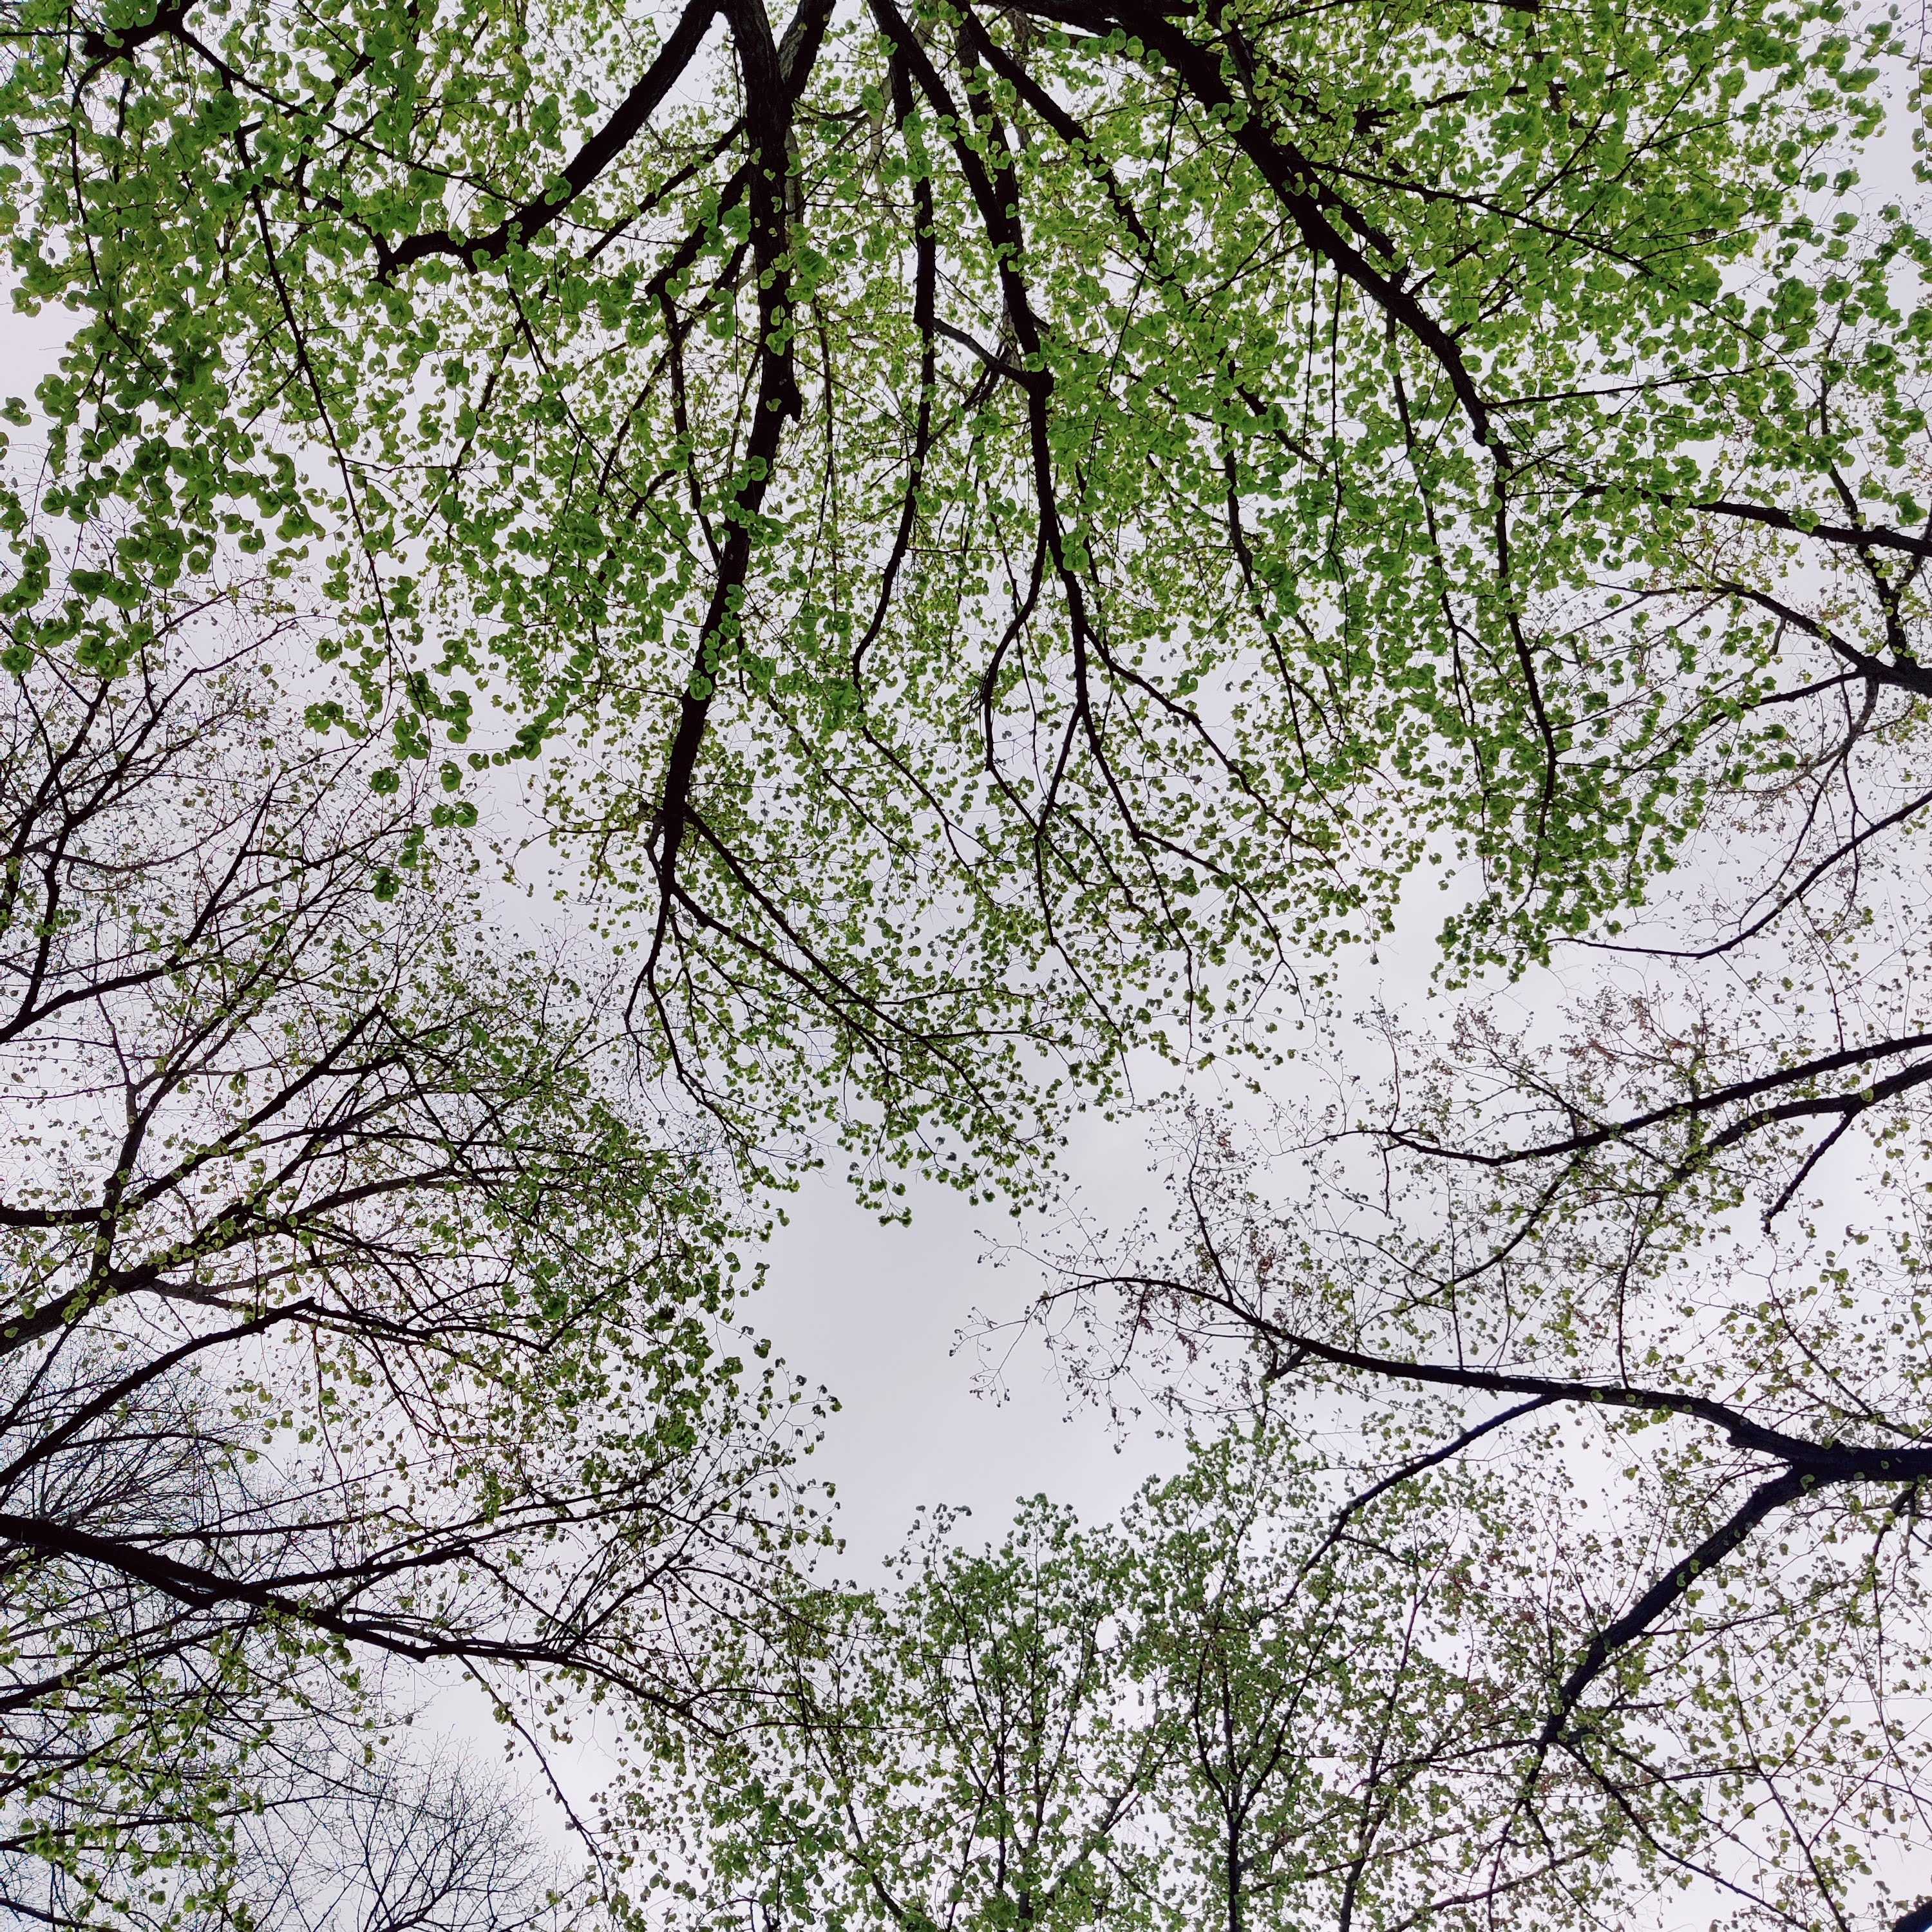 A view looking up into just-leafing trees in early spring.